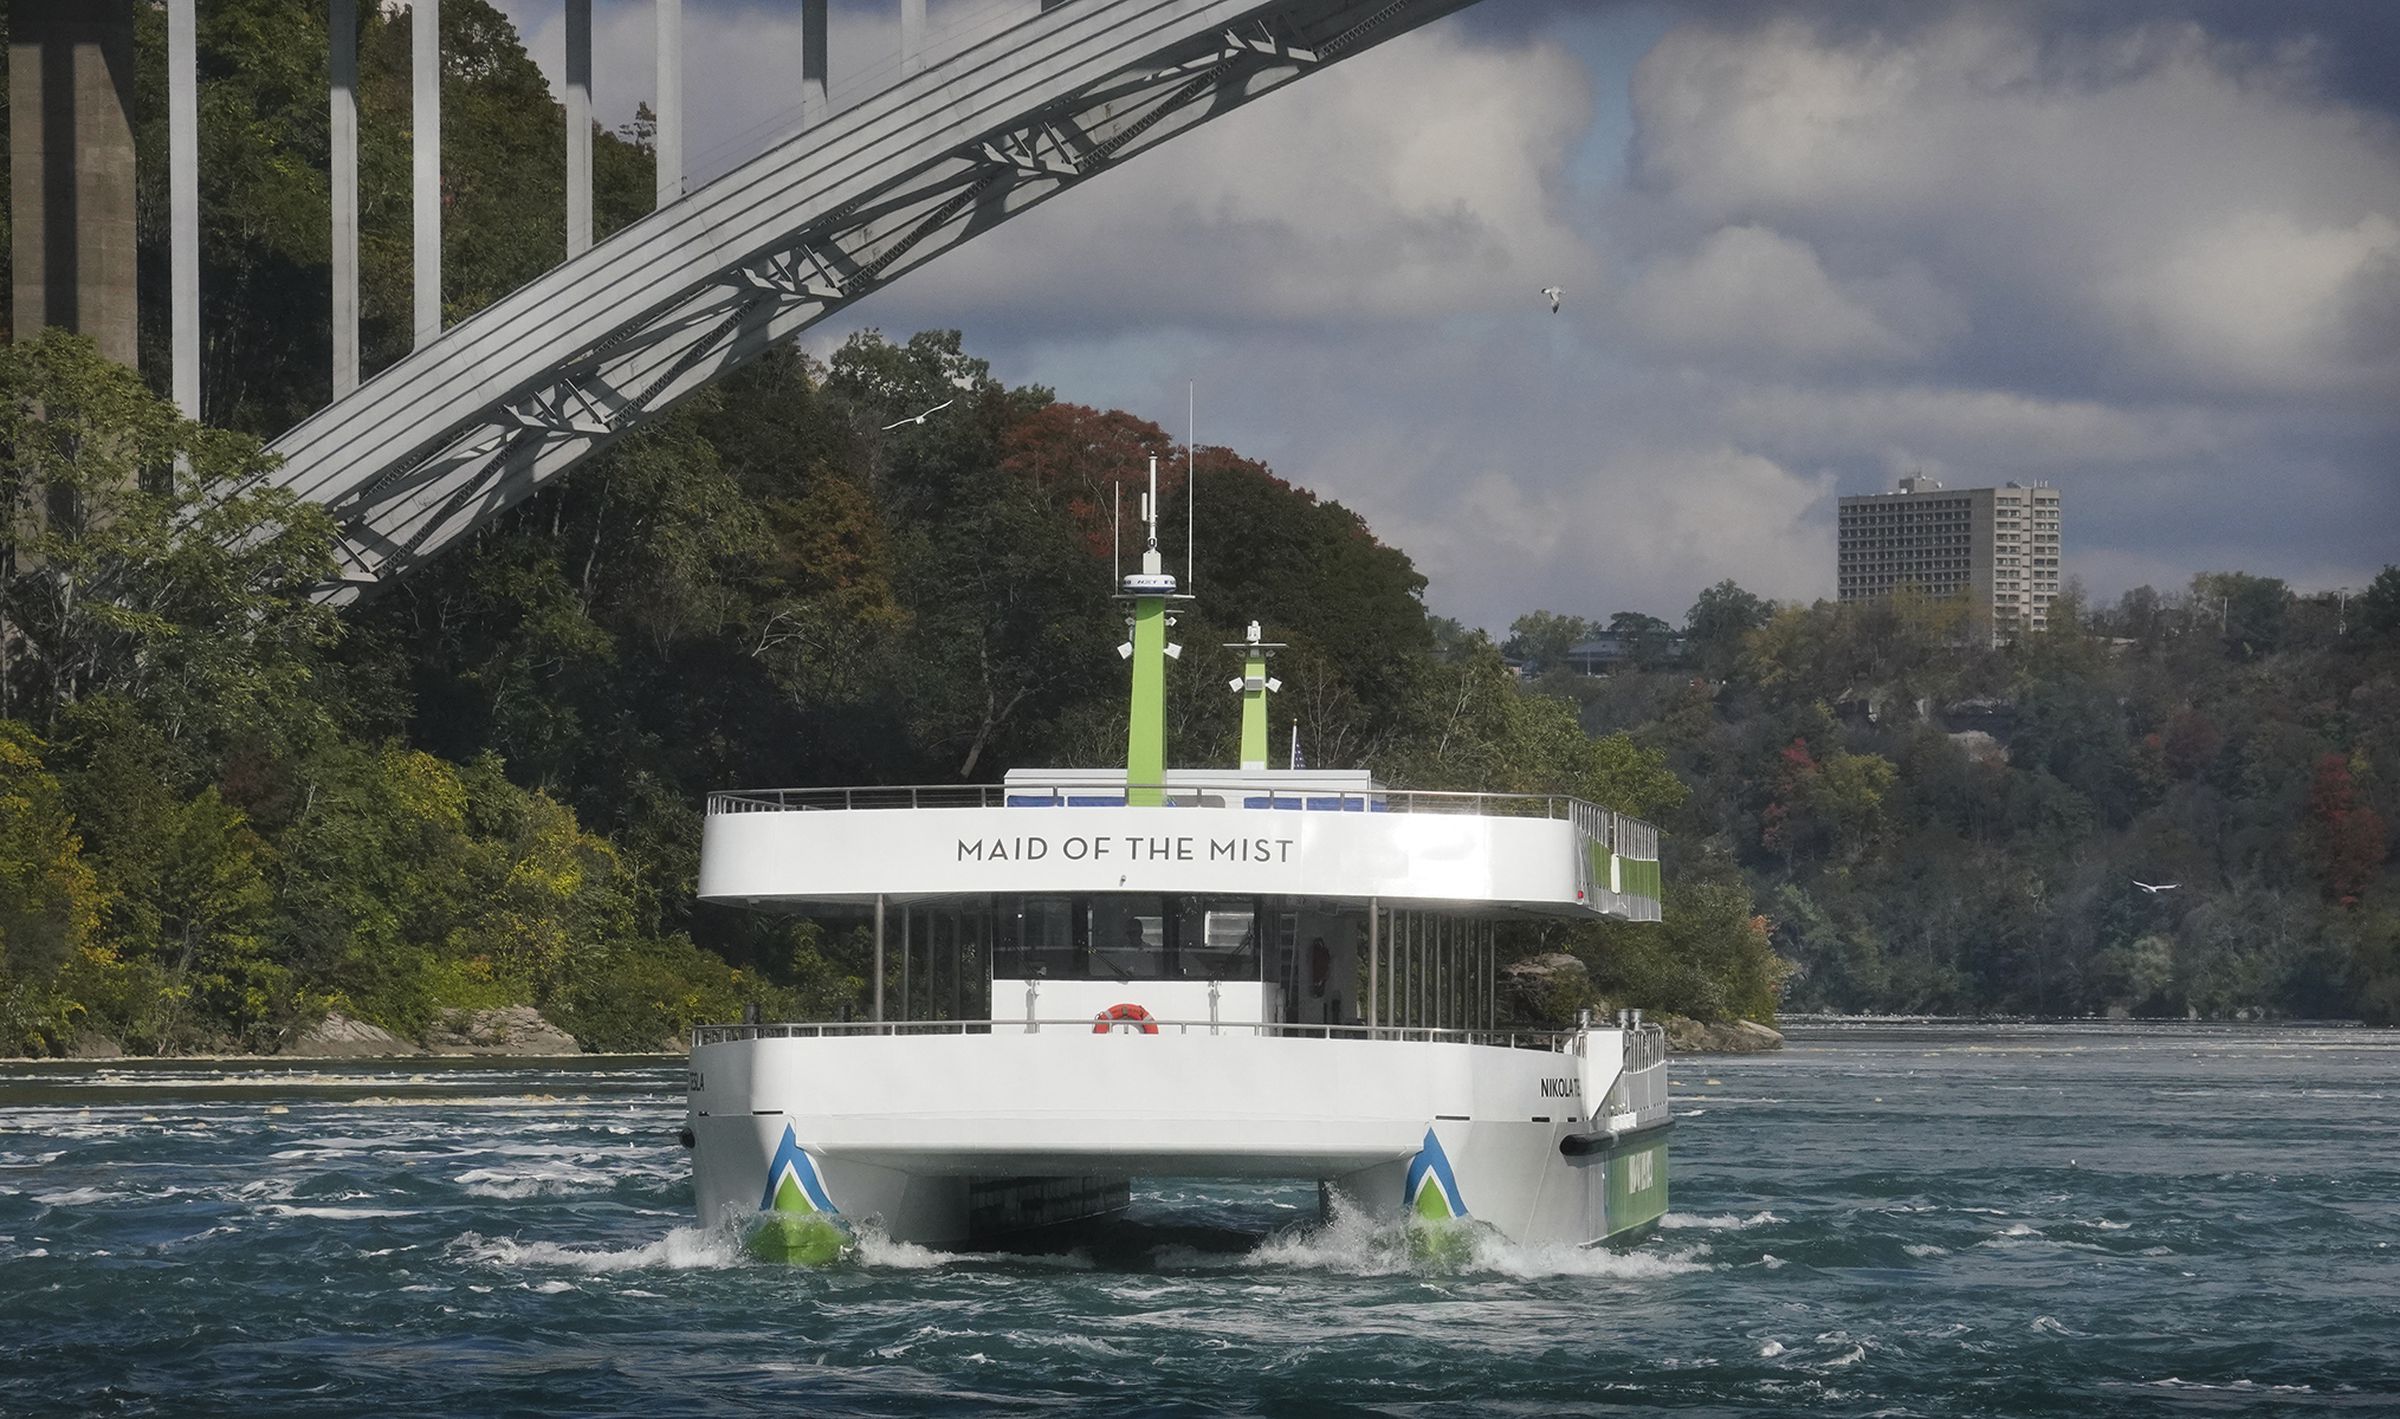 The Maid of the Mist boat tours at Niagara Falls will now be aboard fully electric vessels.